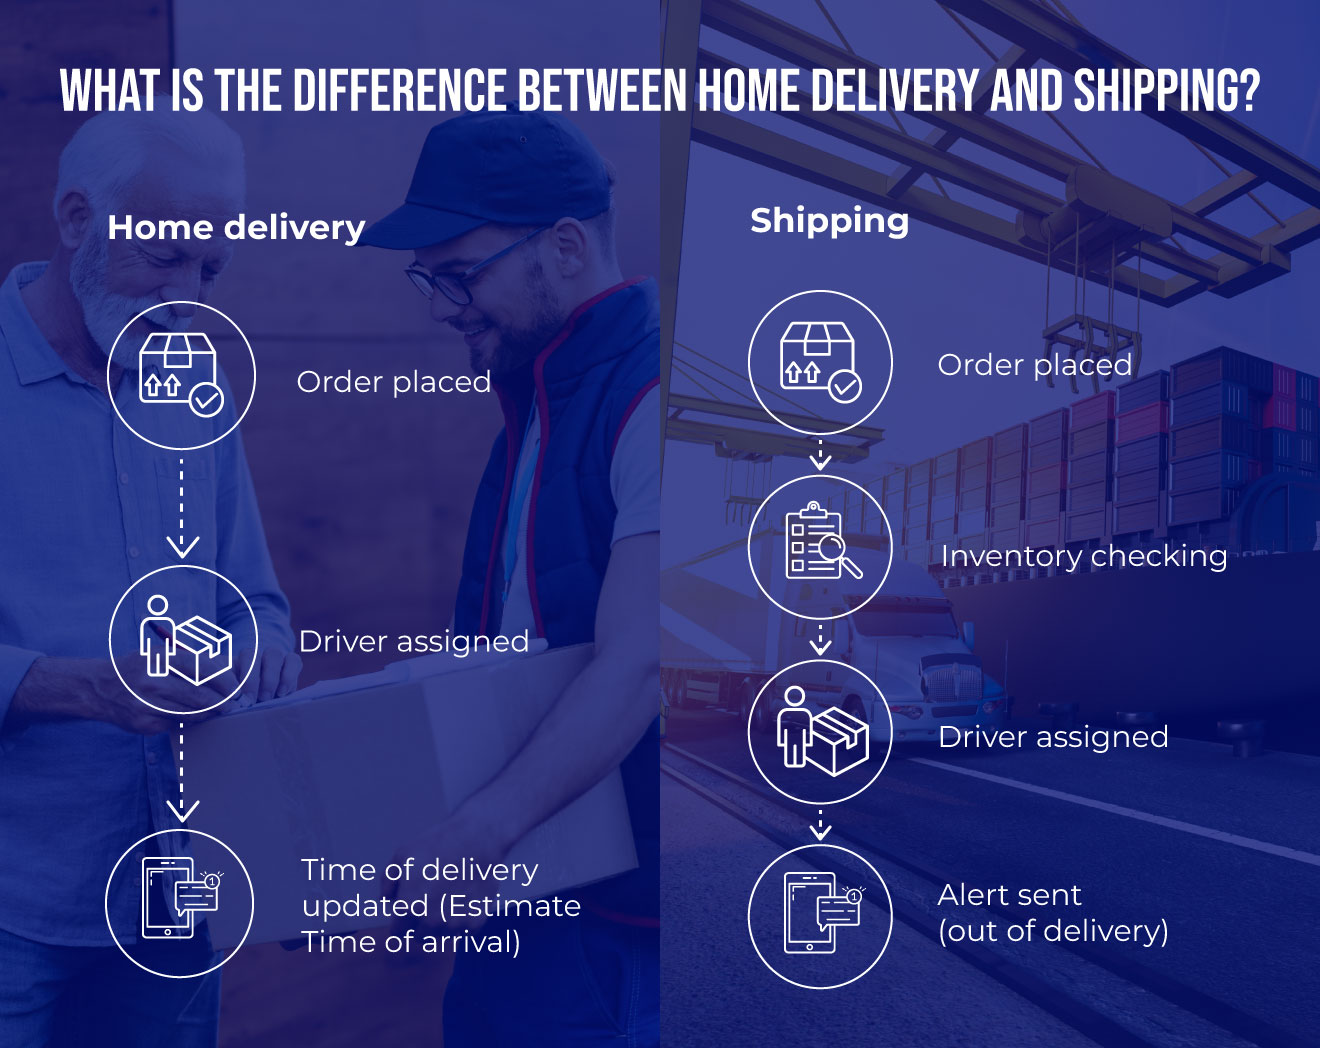 What is the difference between home delivery and shipping?